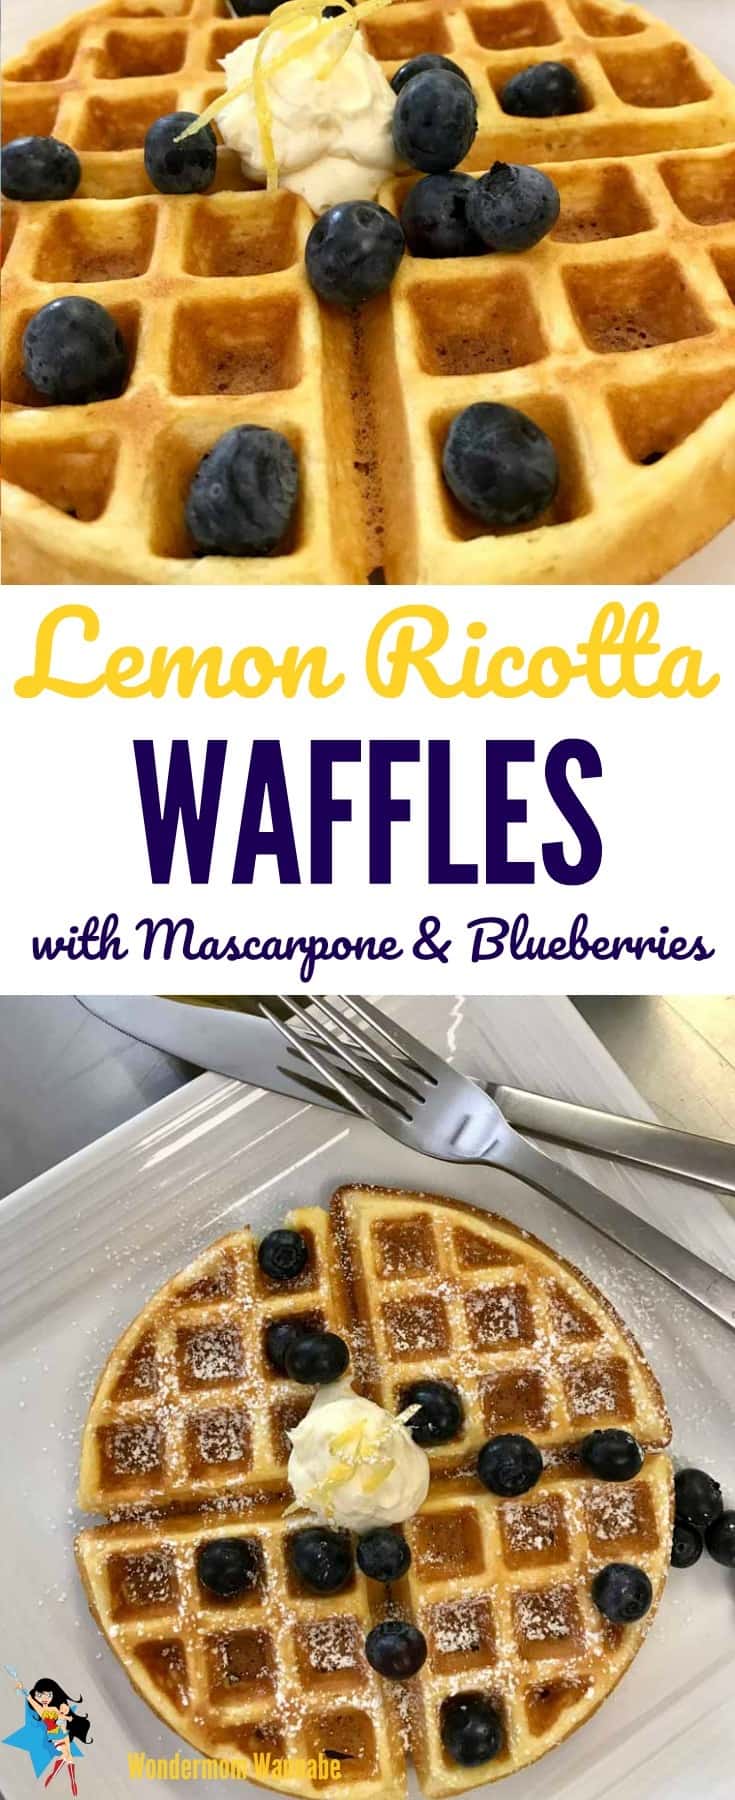 Change up your weekend breakfast routine with these delicious Lemon Ricotta Waffles topped with mascarpone and blueberries. #breakfast #waffles #mascarpone #blueberries via @wondermomwannab